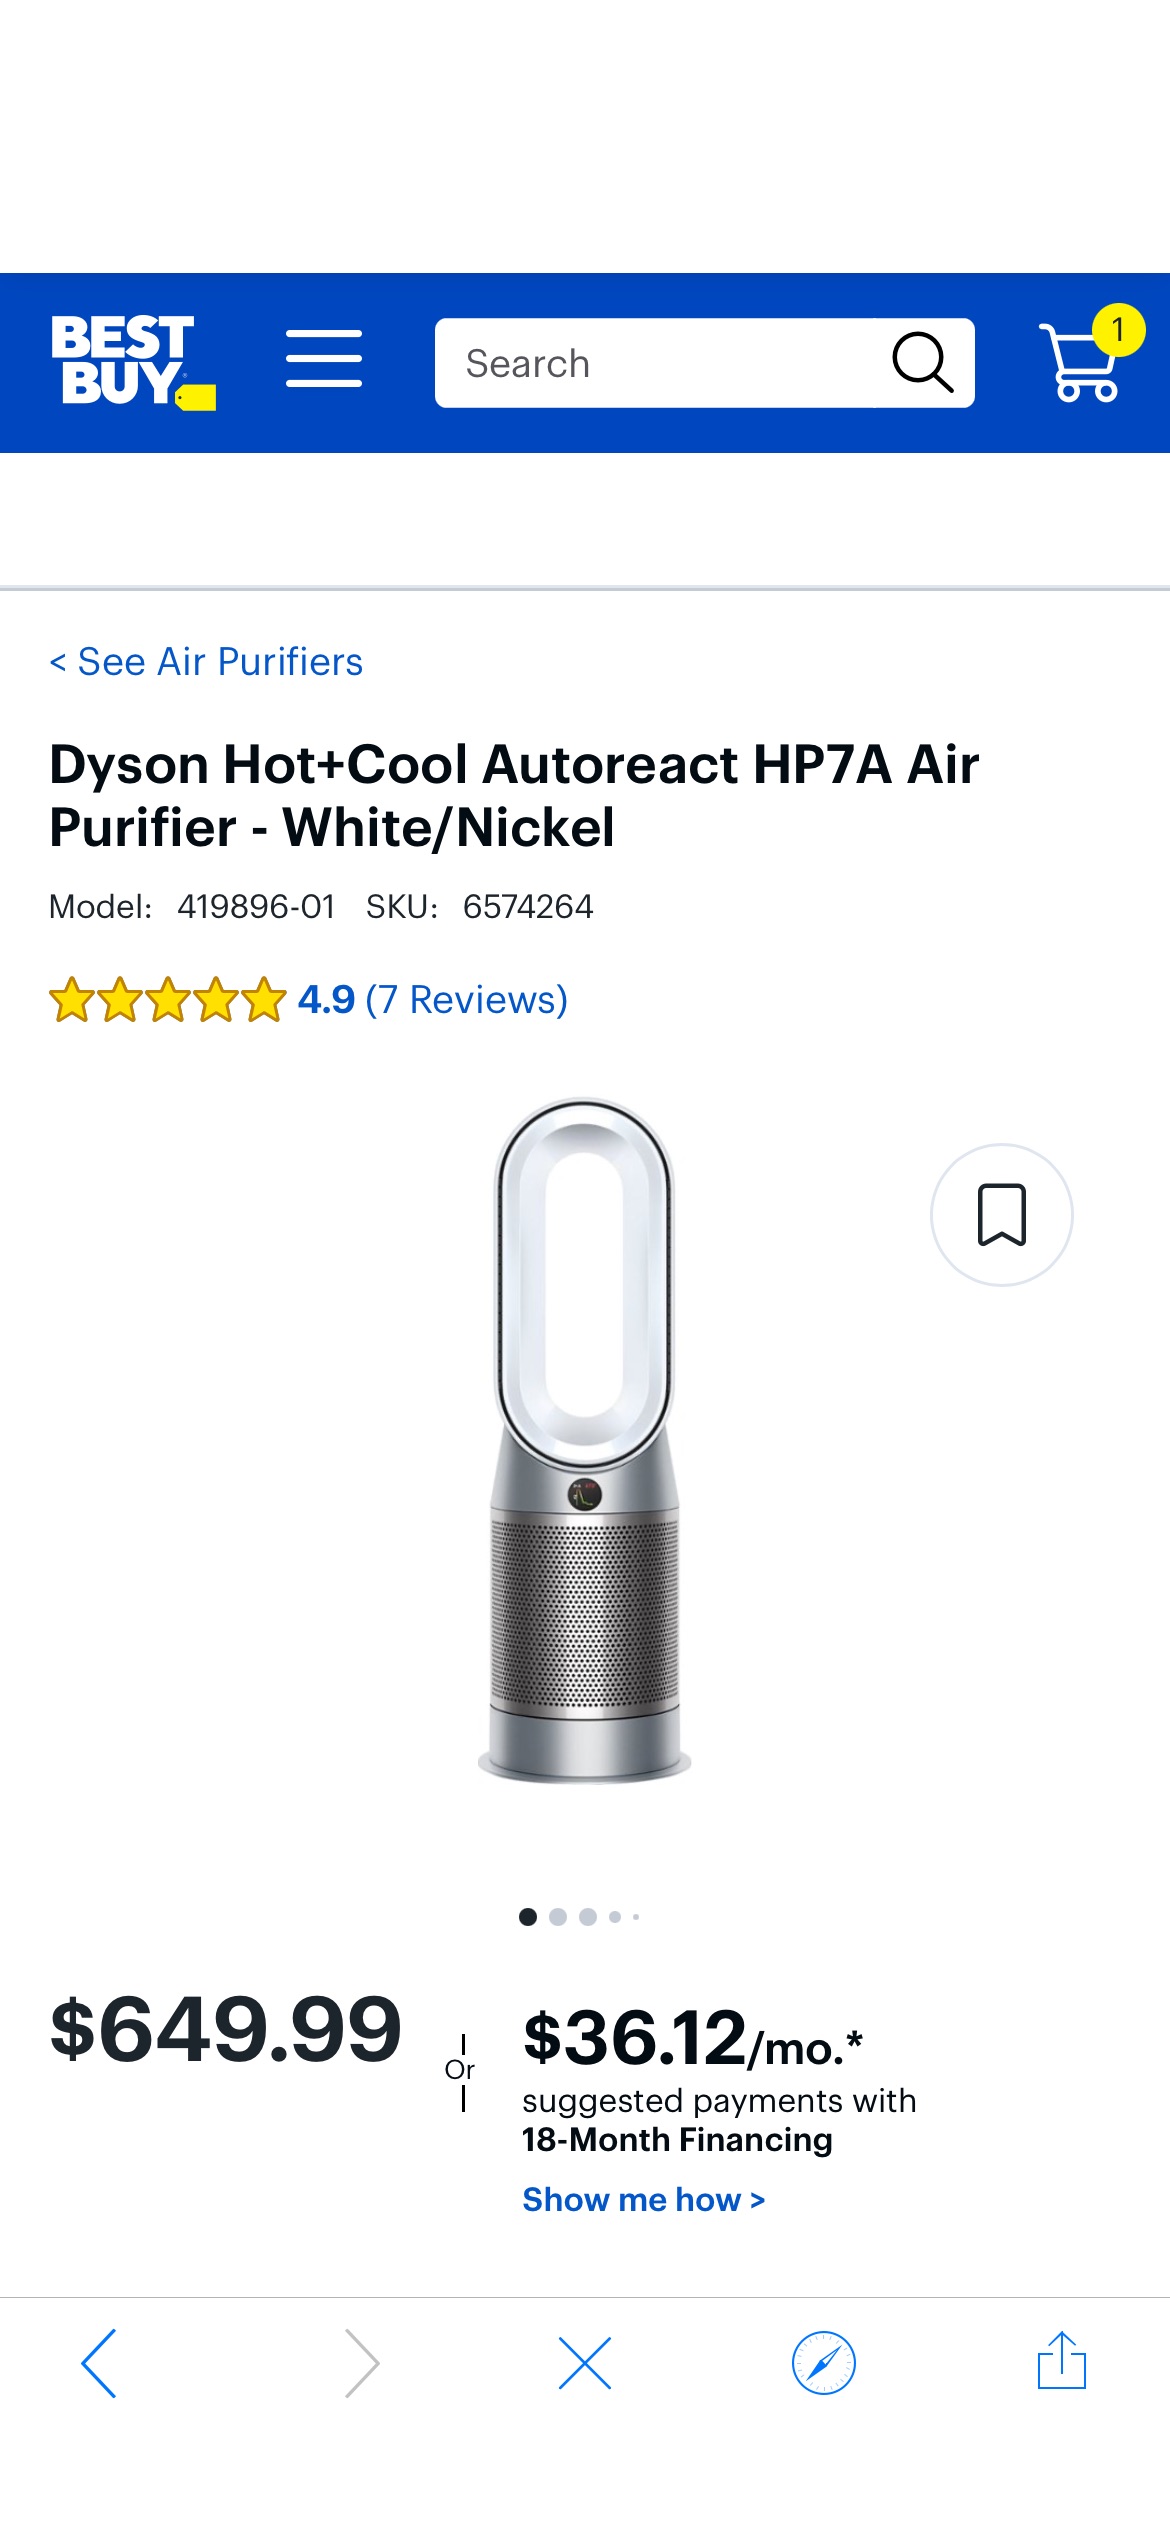 Dyson Hot+Cool Autoreact HP7A Air Purifier White/Nickel 419896-01 - Best Buy